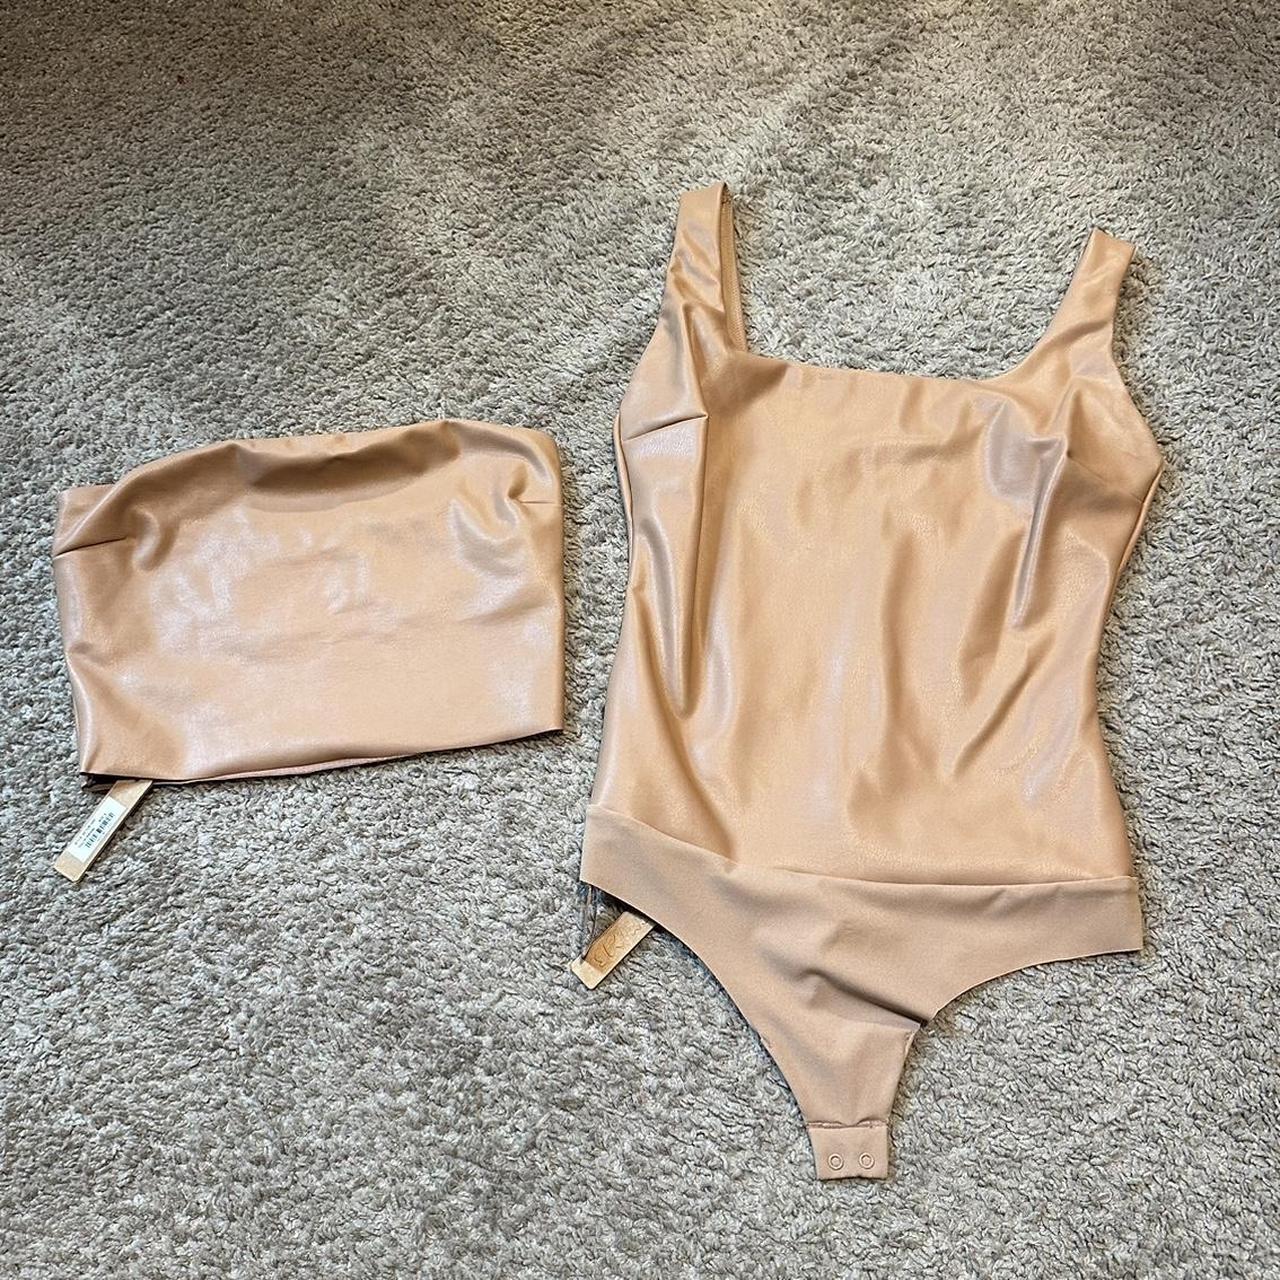 Skims Faux Leather Set. Tube top and pants included - Depop